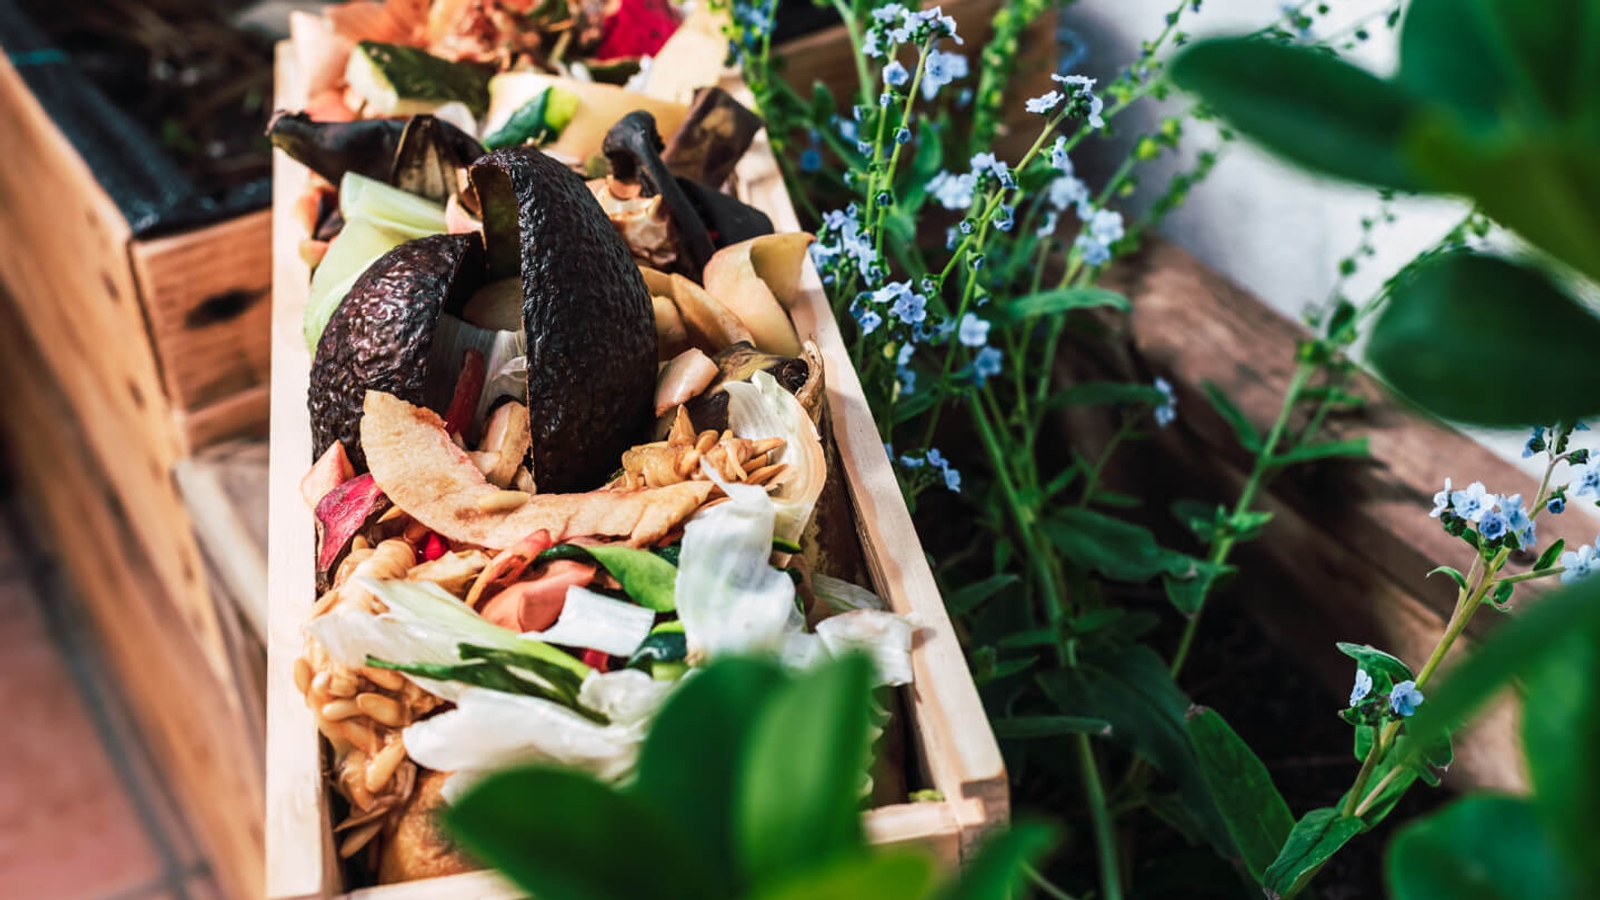 A wooden crate filled with compostable food scraps like vegetable peels and fruit remnants, placed in a garden, signifying organic waste recycling.